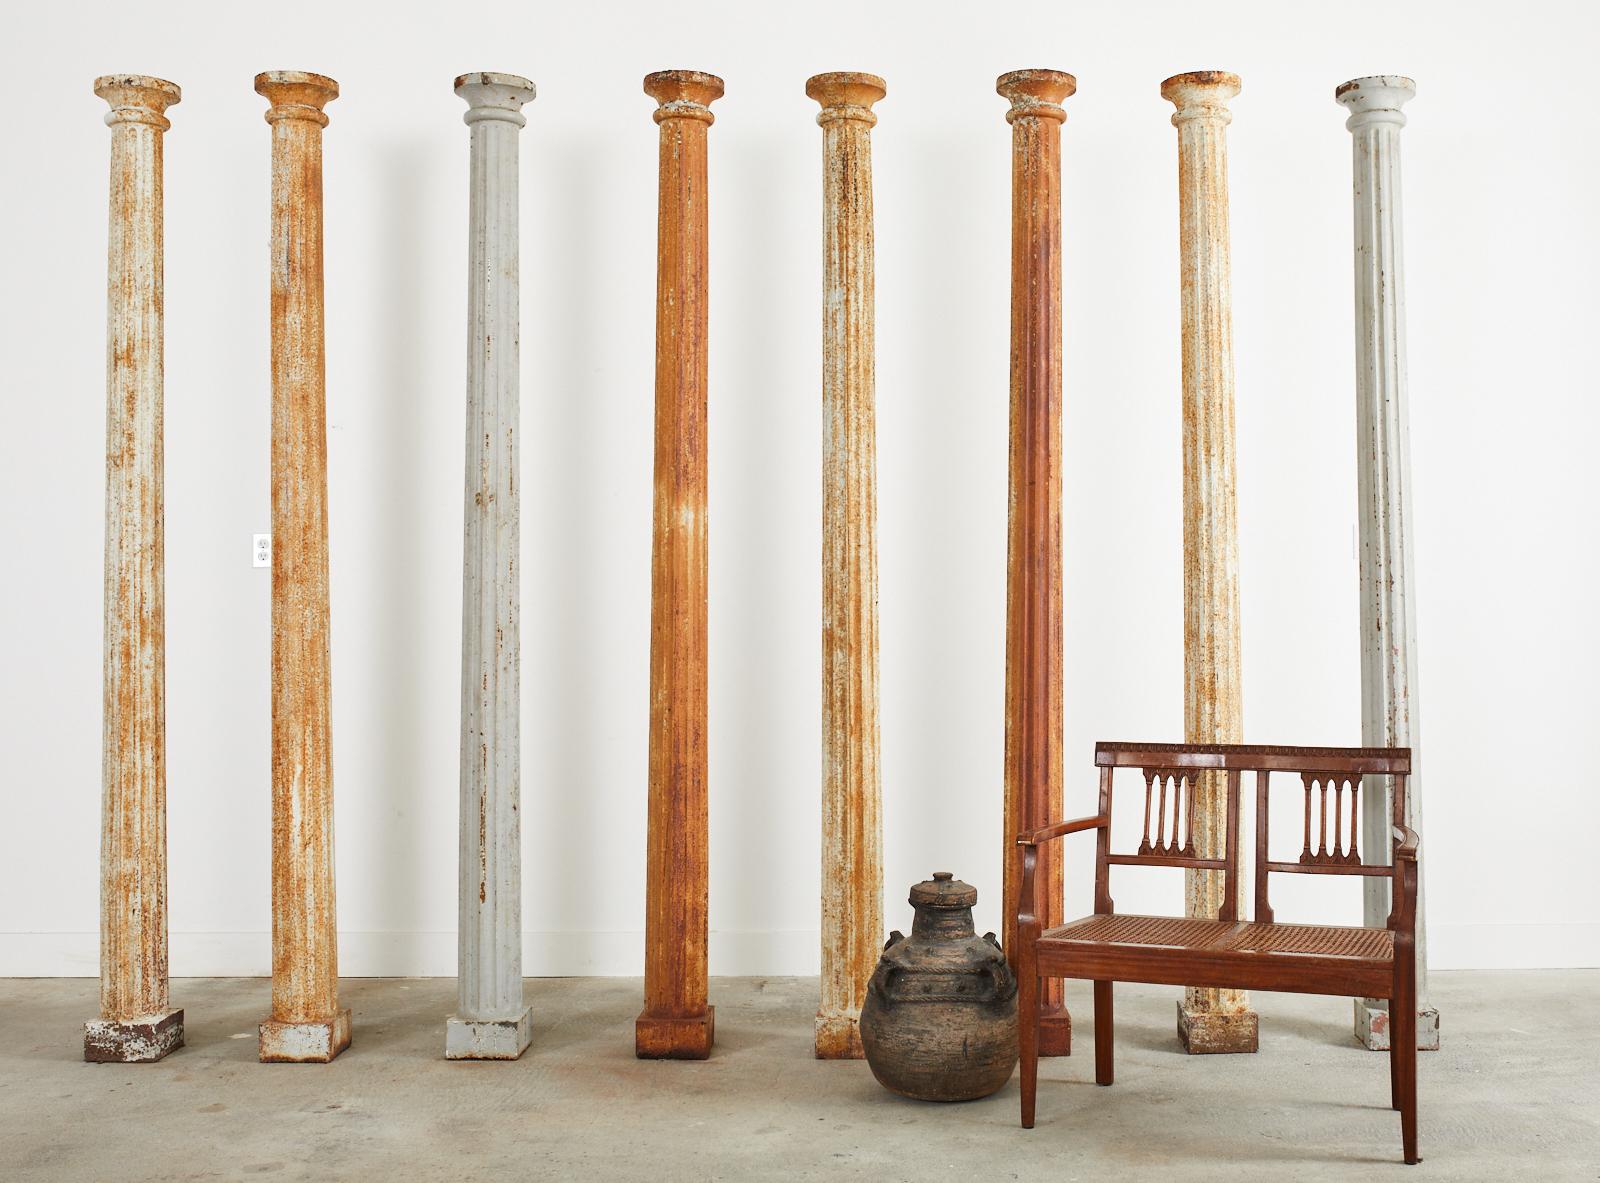 Amazing set of eight matching 19th century neoclassical, or Greco Roman style cast iron columns featuring an elegant fluted shaft. The columns are complete one piece casts with a square base measuring 7.5 inches wide. The capitols feature a double